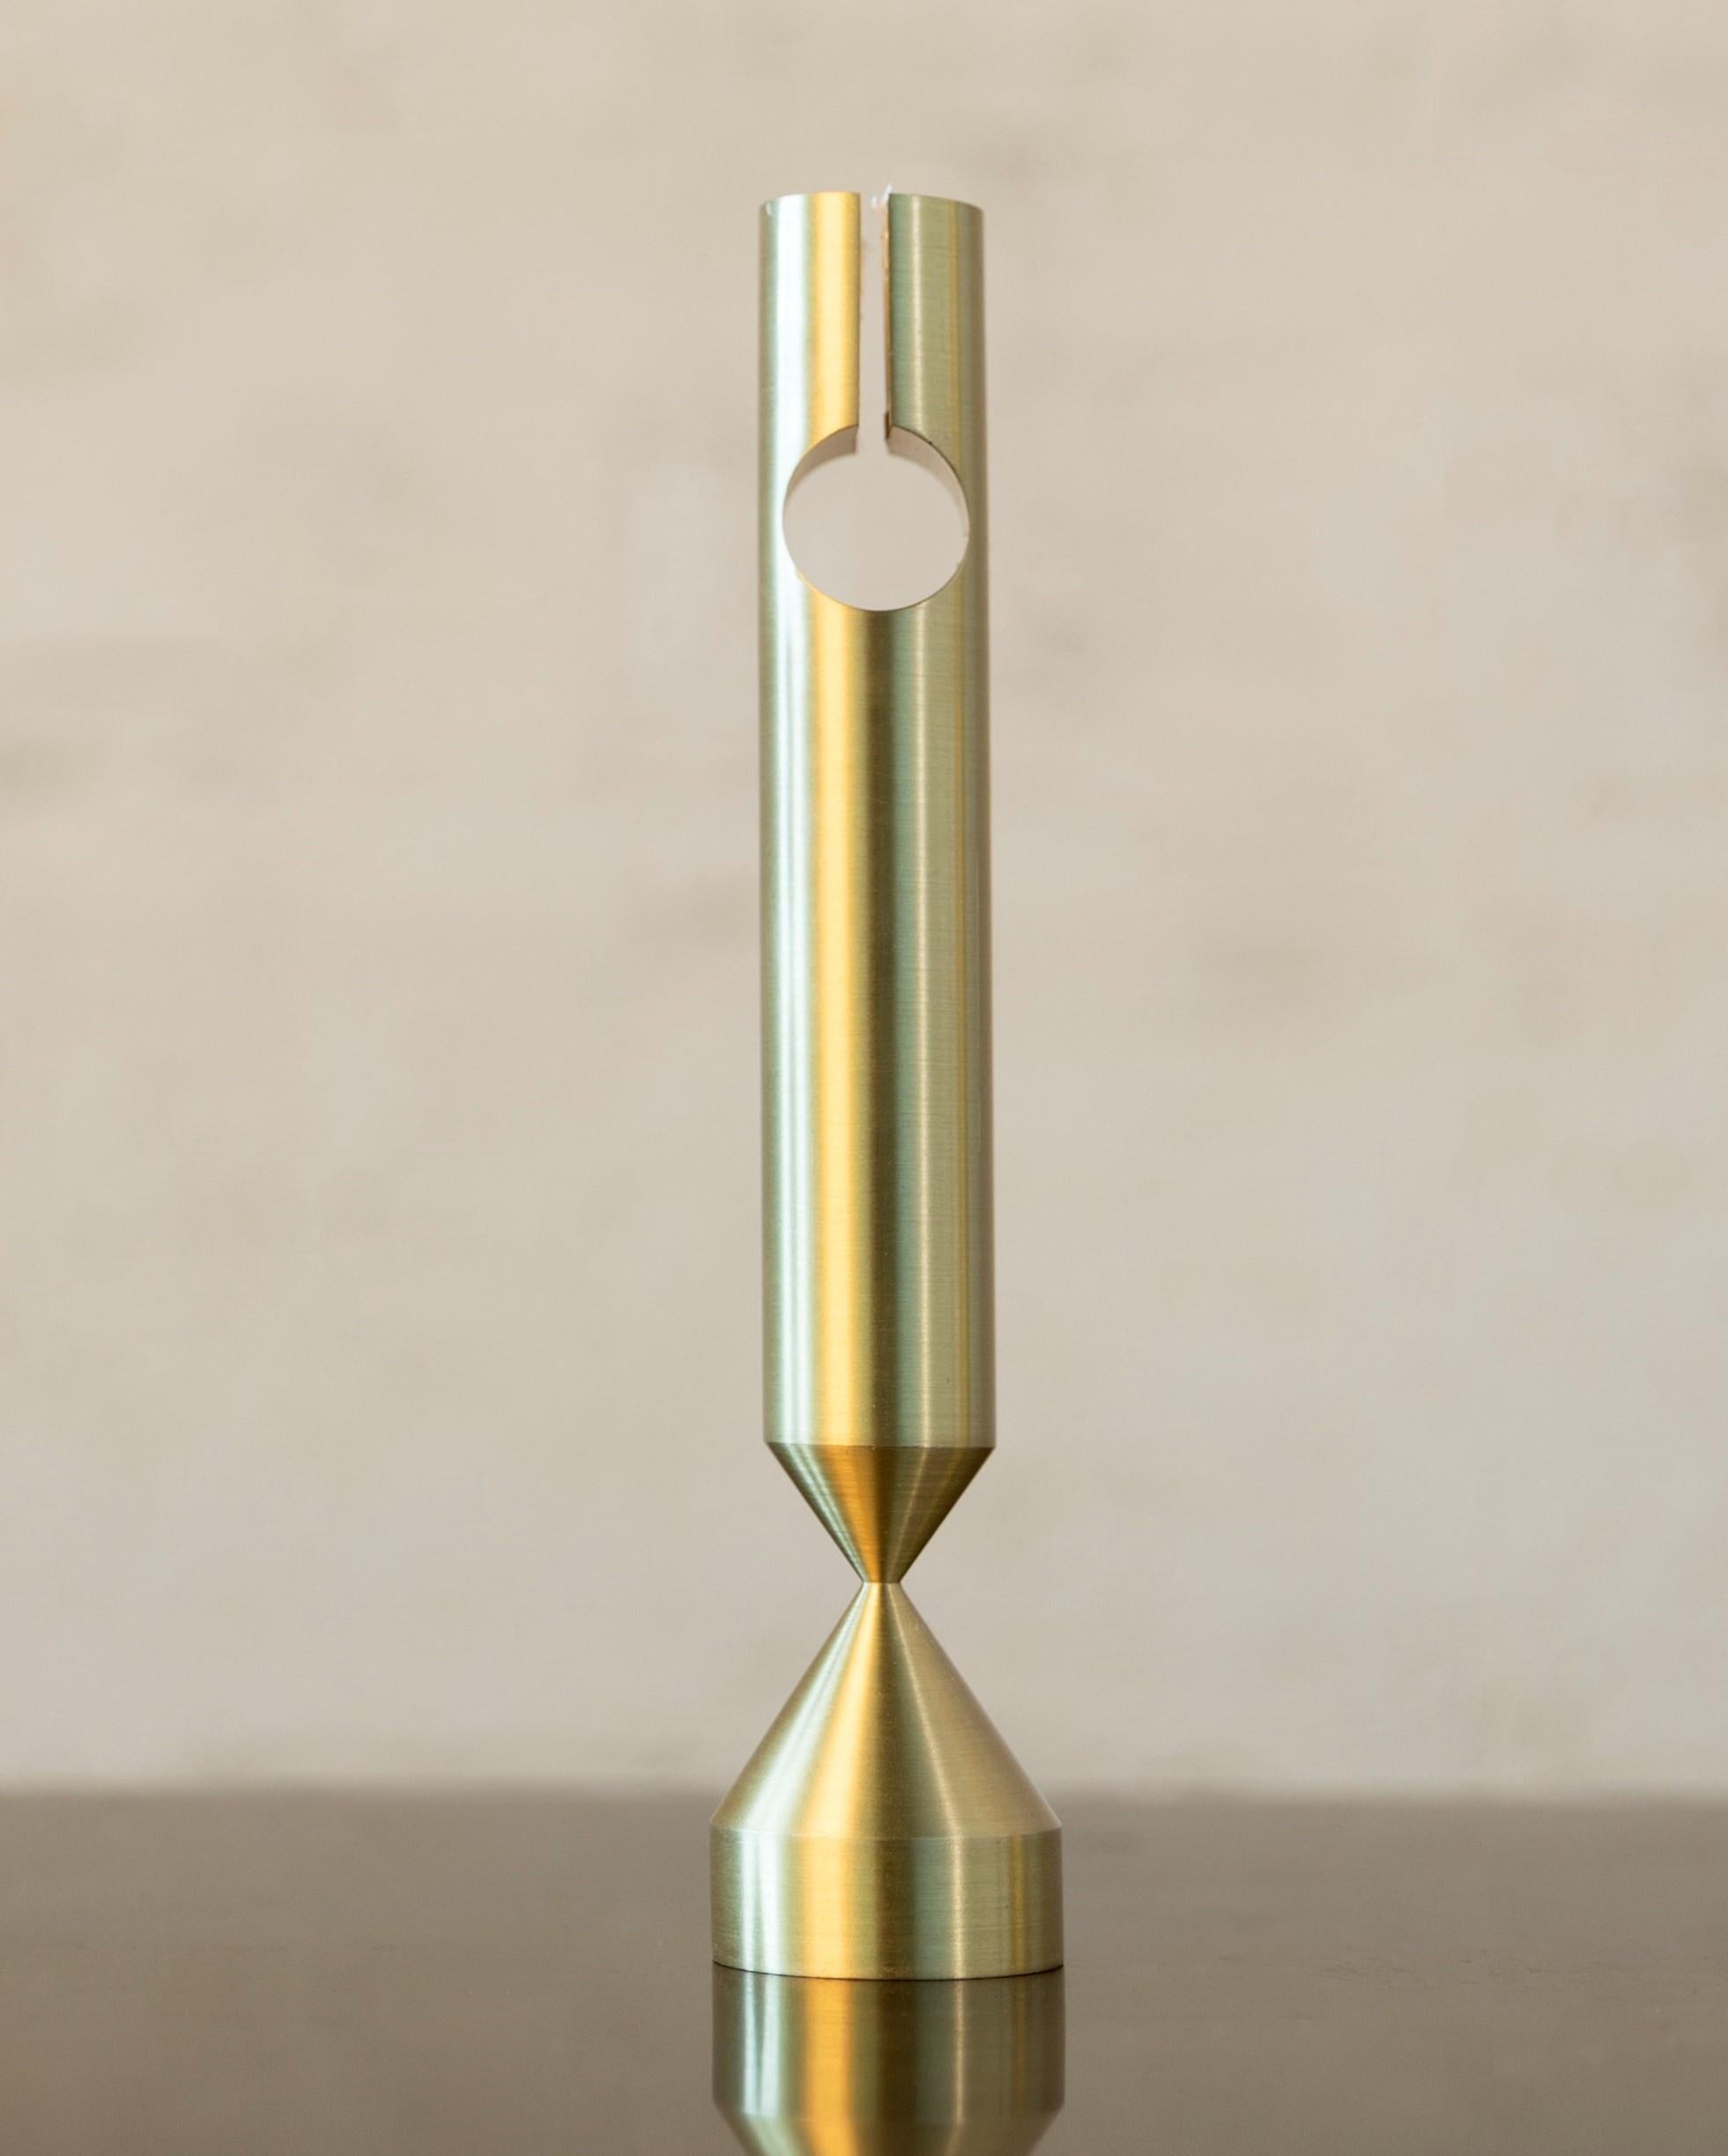 Medium pillar brass candlestick by Gentner Design
Dimensions: D 3.8 x H 16.3 cm
Materials: brush raw brass
Available in brush raw brass and darkened brass.
Available in small, medium and large.

Gentner Design
Rooted in a language of sculpture,